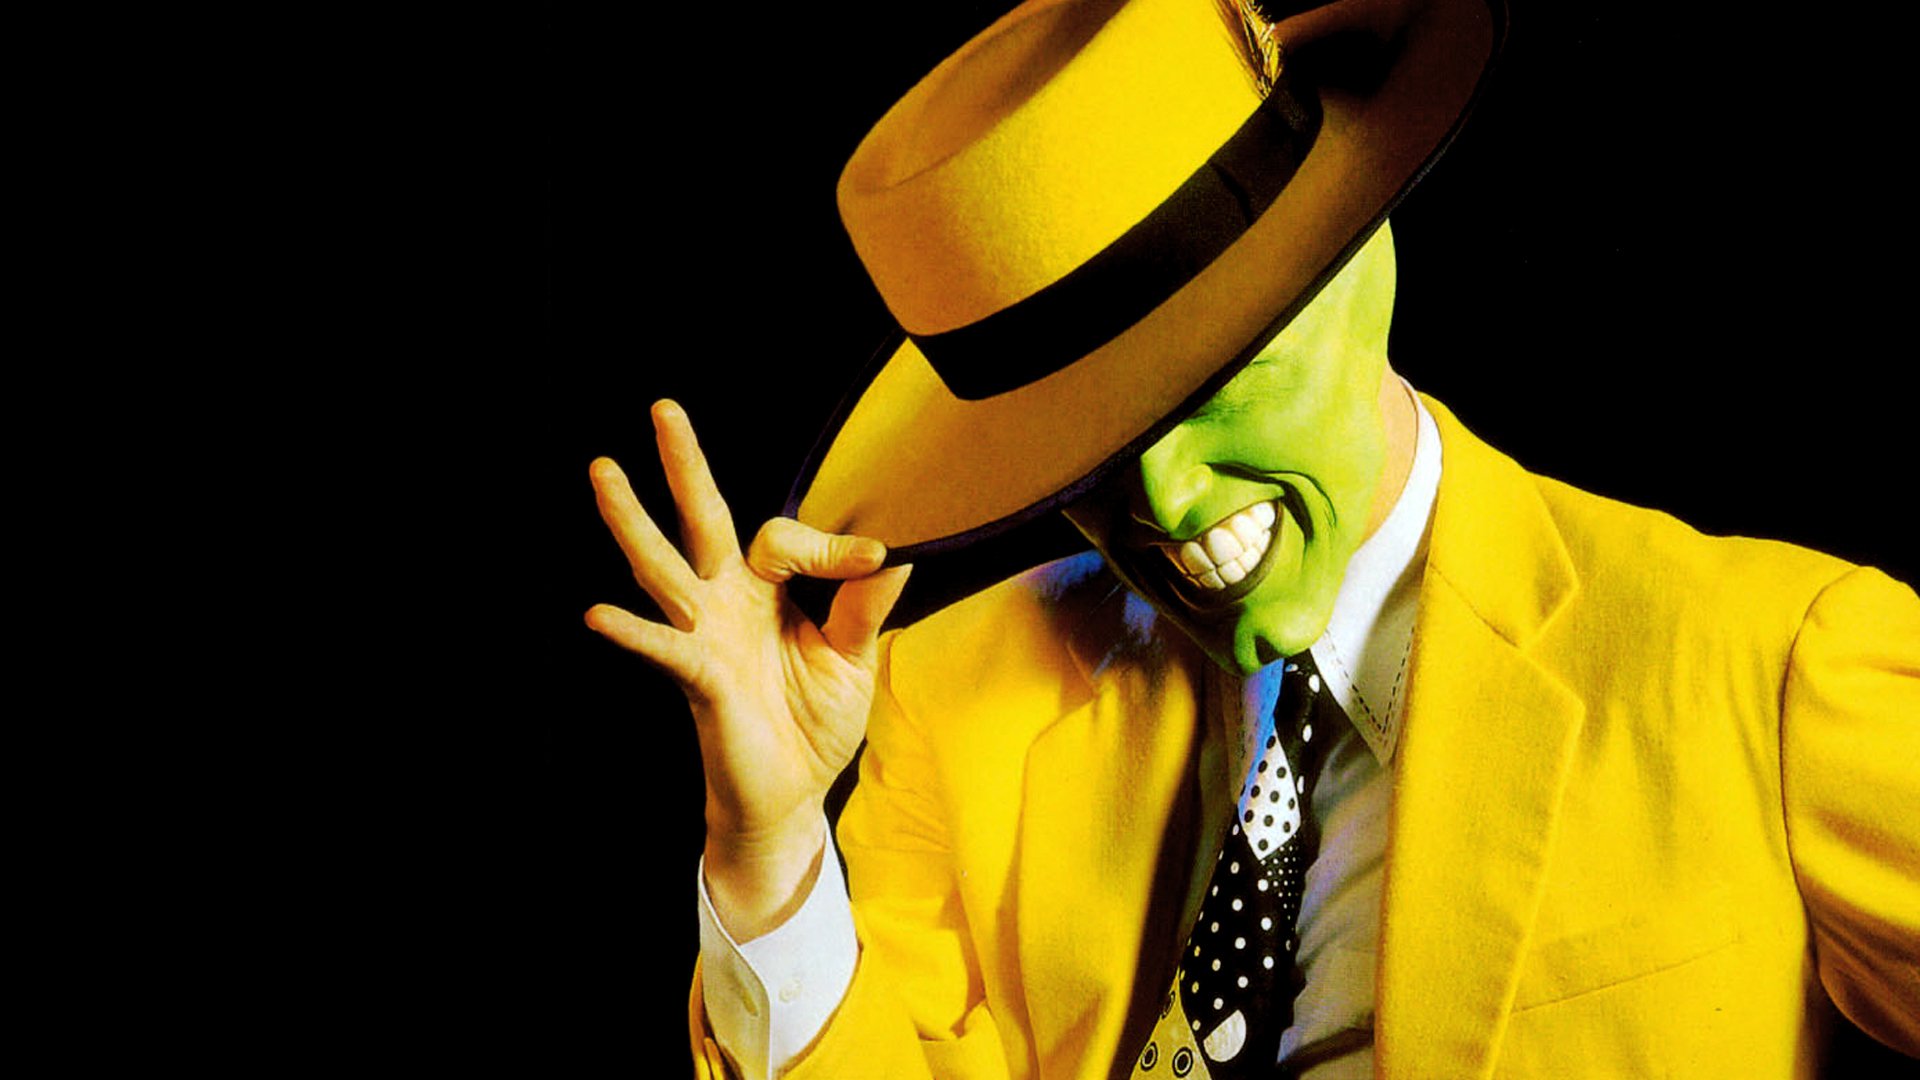 Movie The Mask 1920x1080